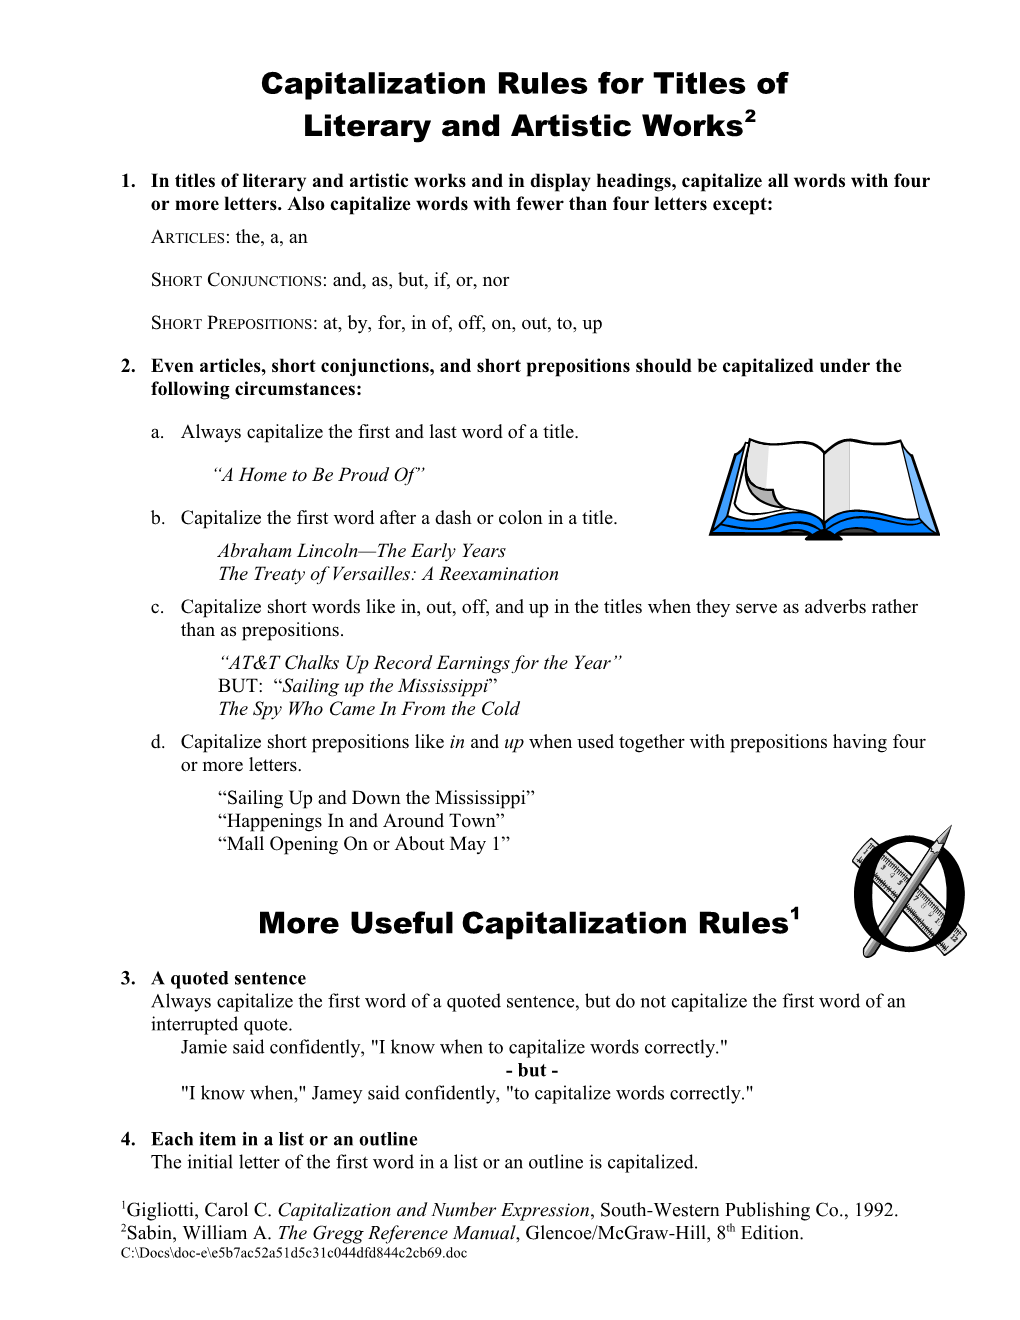 Capitalization Rules for Titles of Literary and Artistic Works